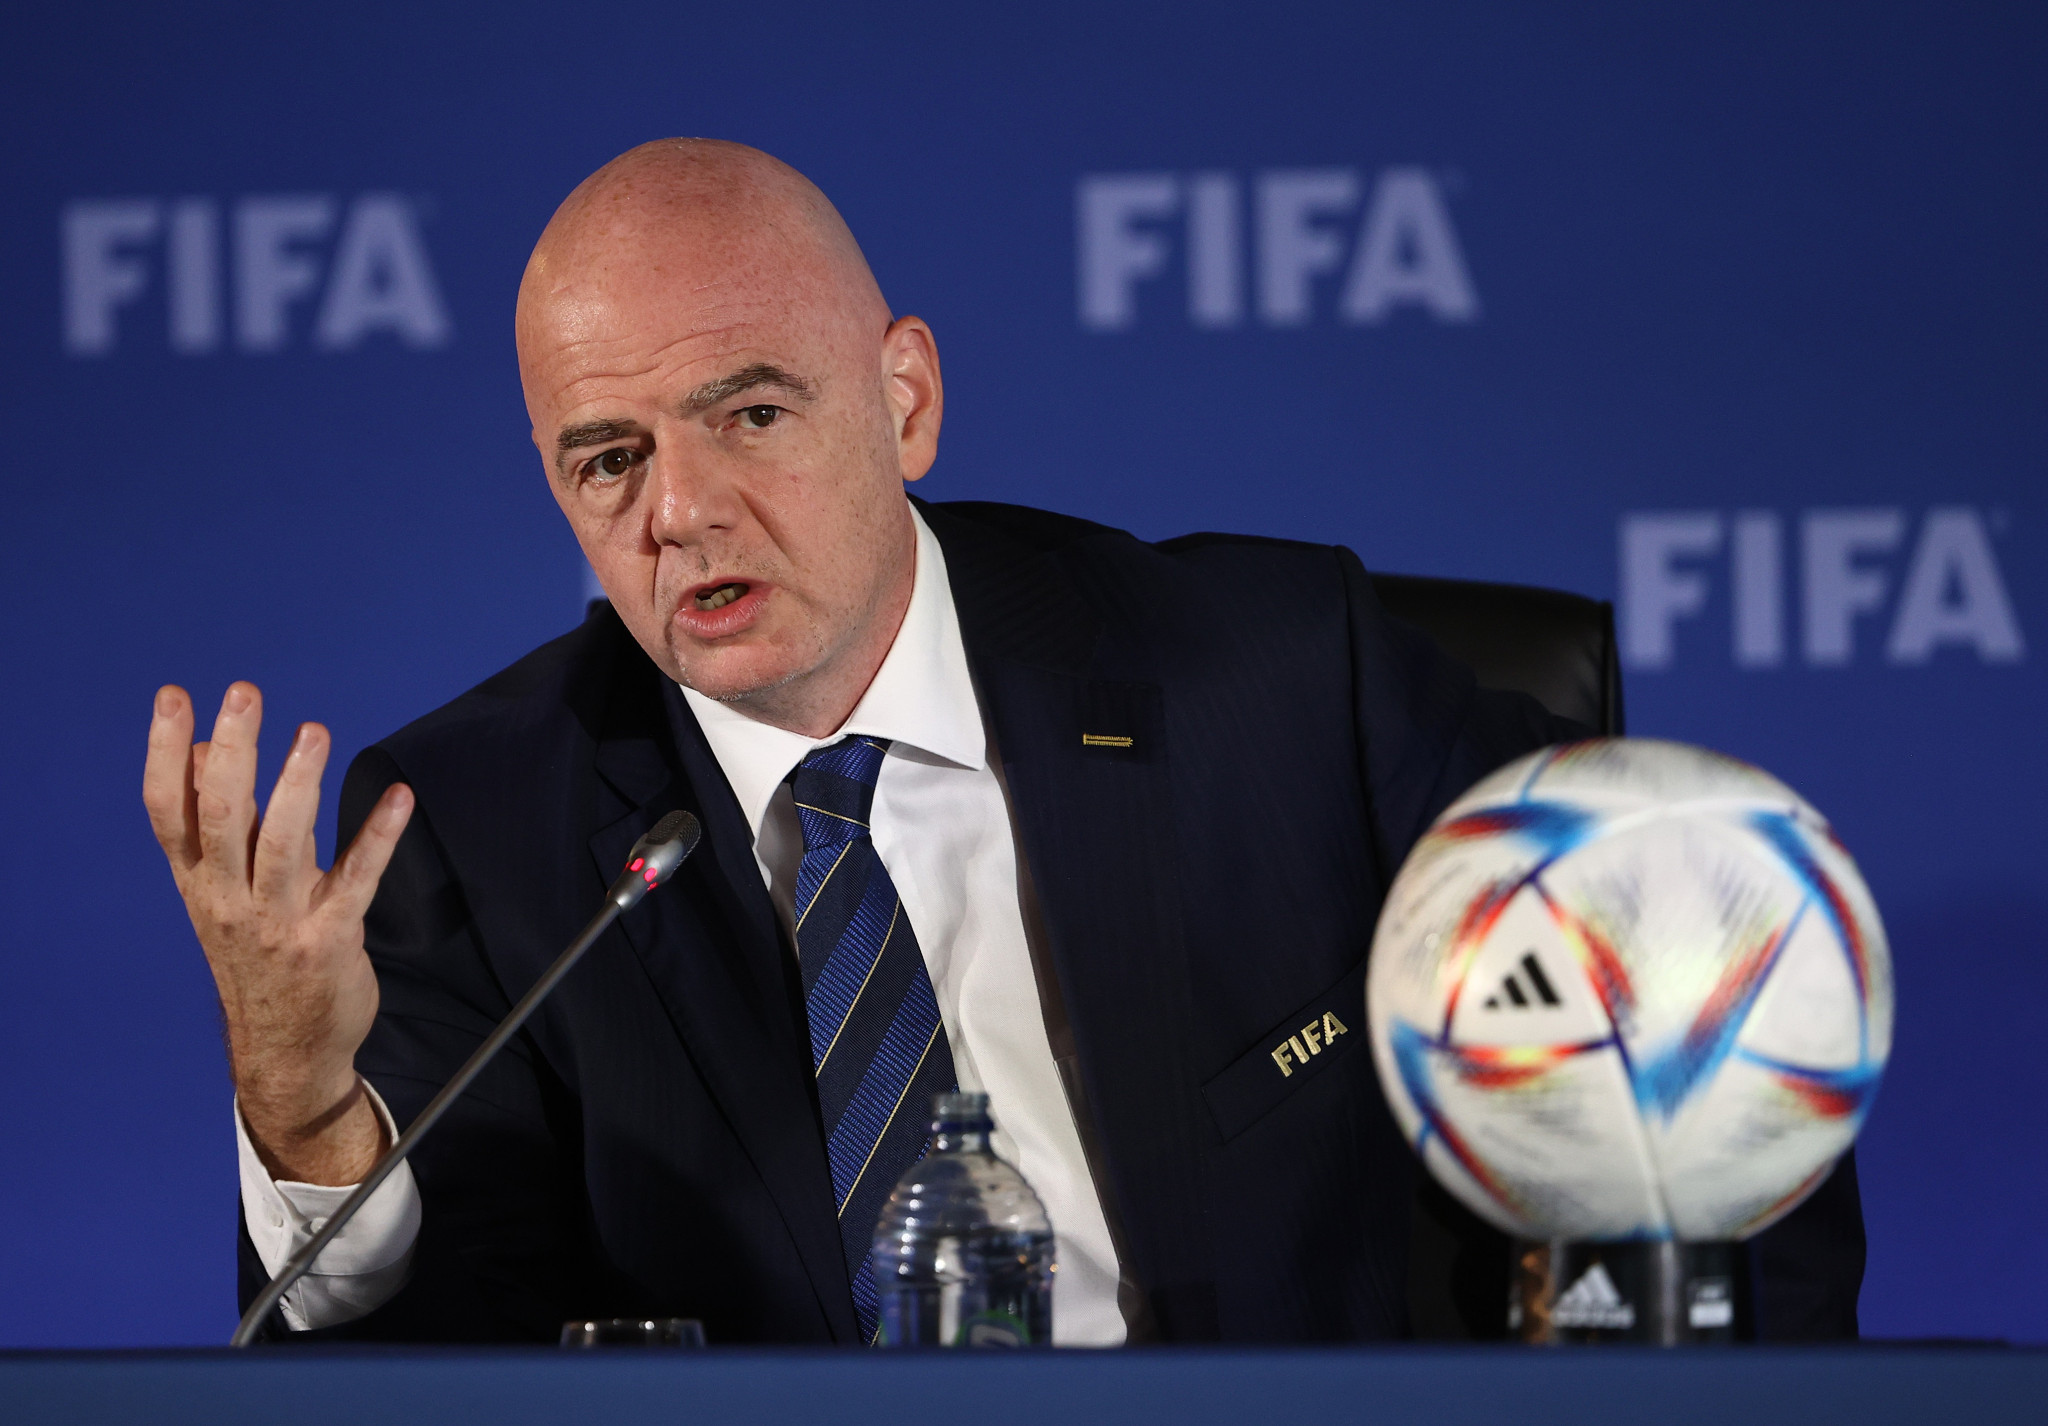 FIFA President Gianni Infantino has issued a letter to teams encouraging them to "focus on football" in Qatar ©Getty Images